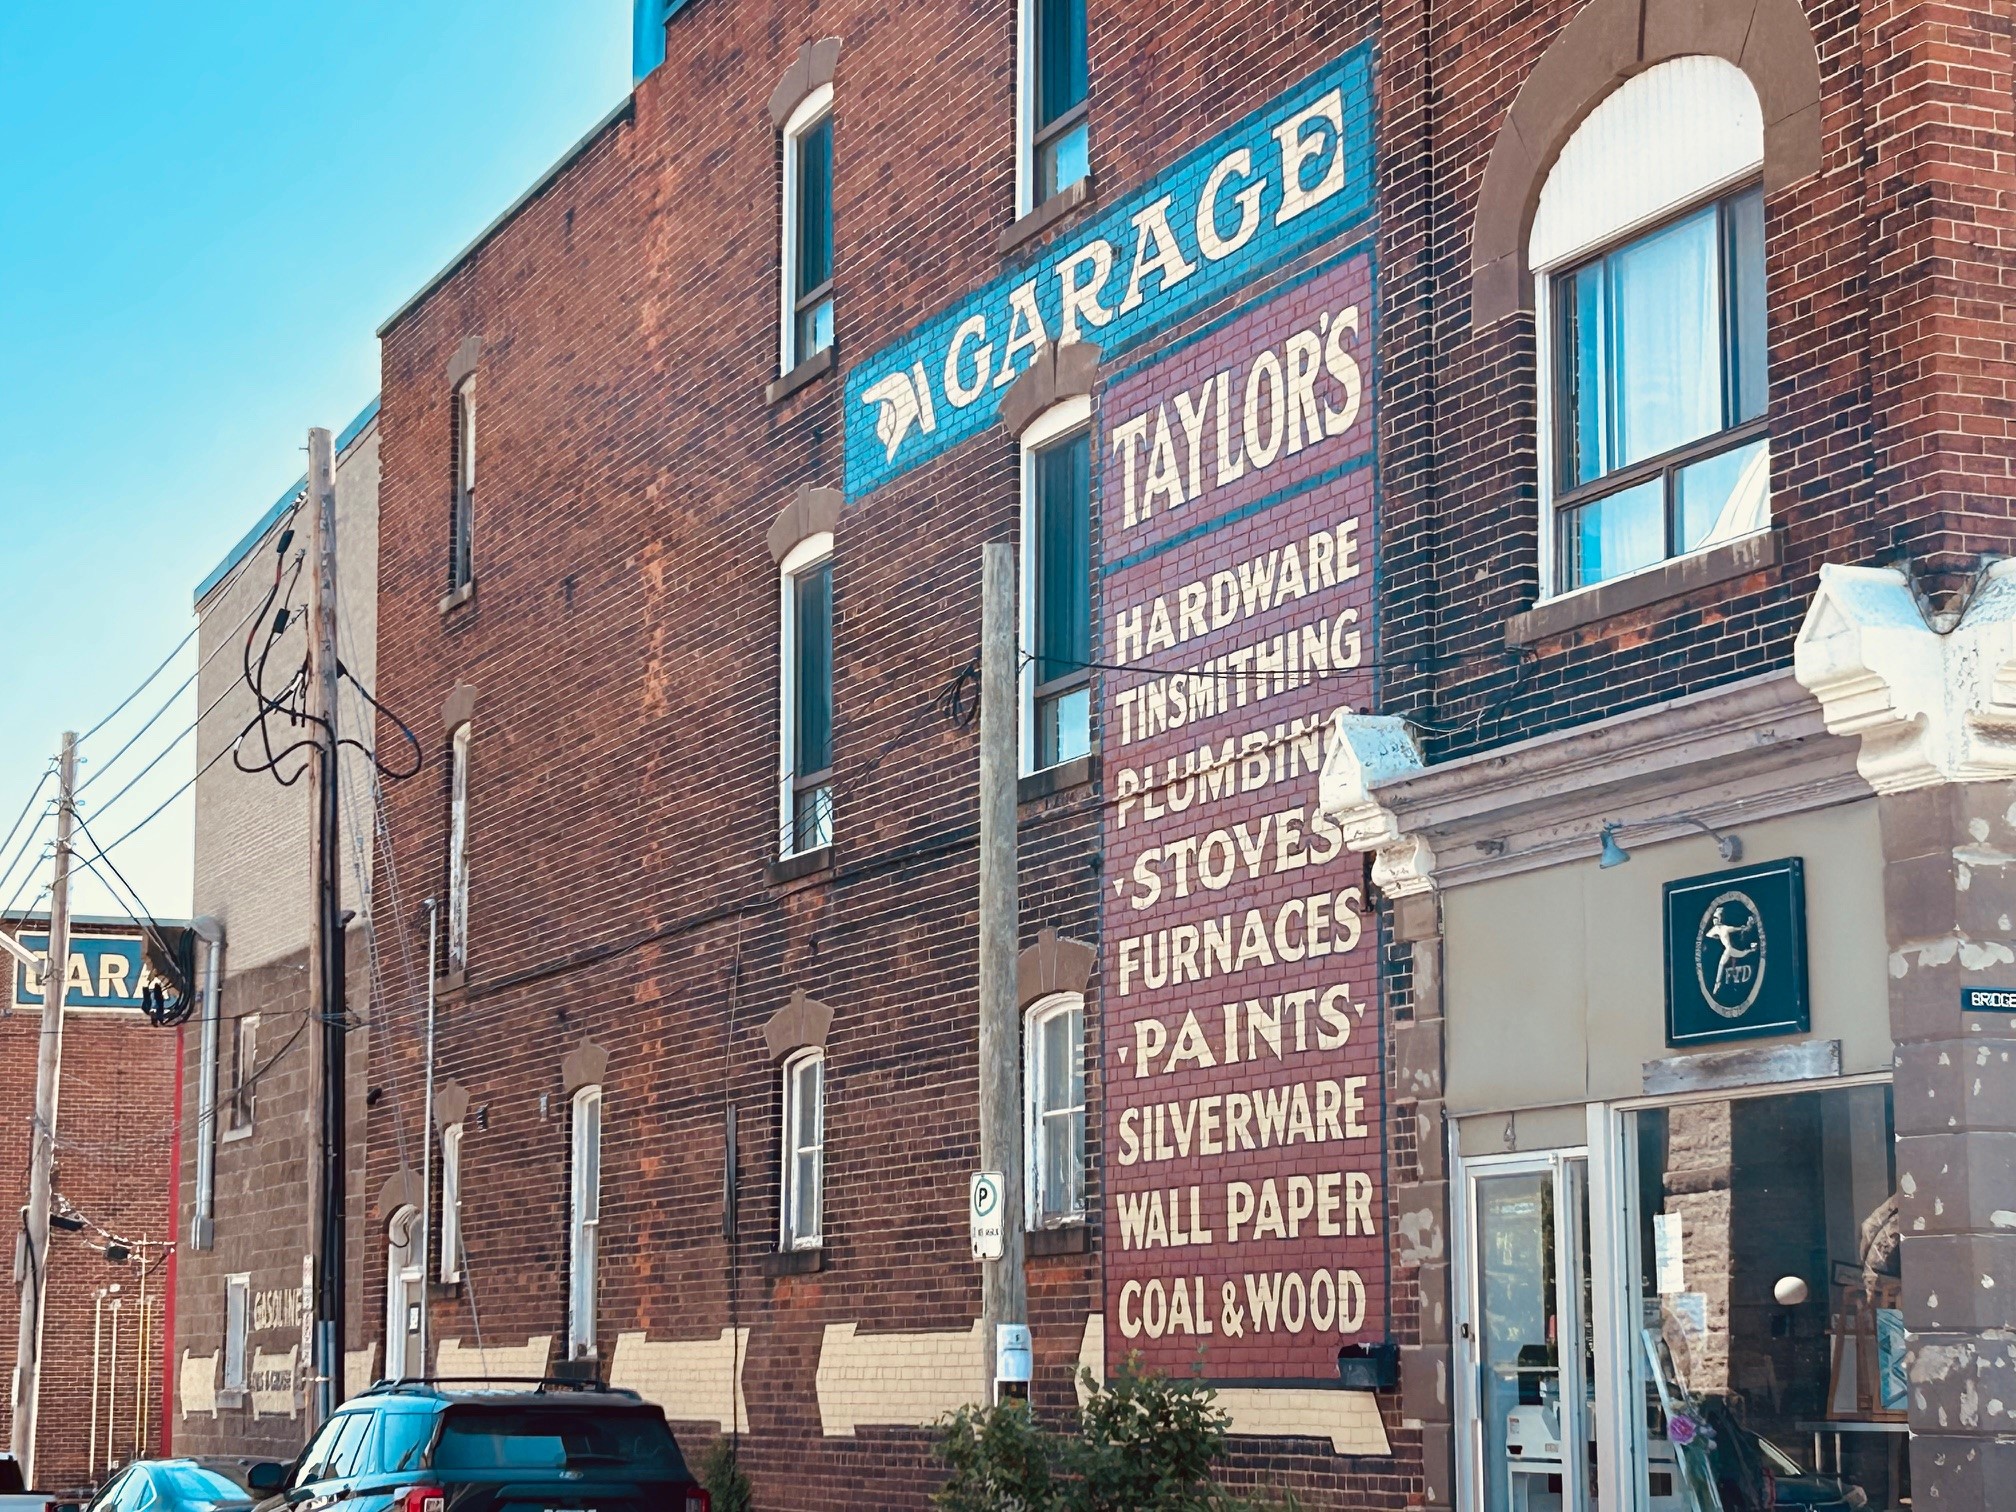 Image of 2 murals, garage and Taylors on the side of a building